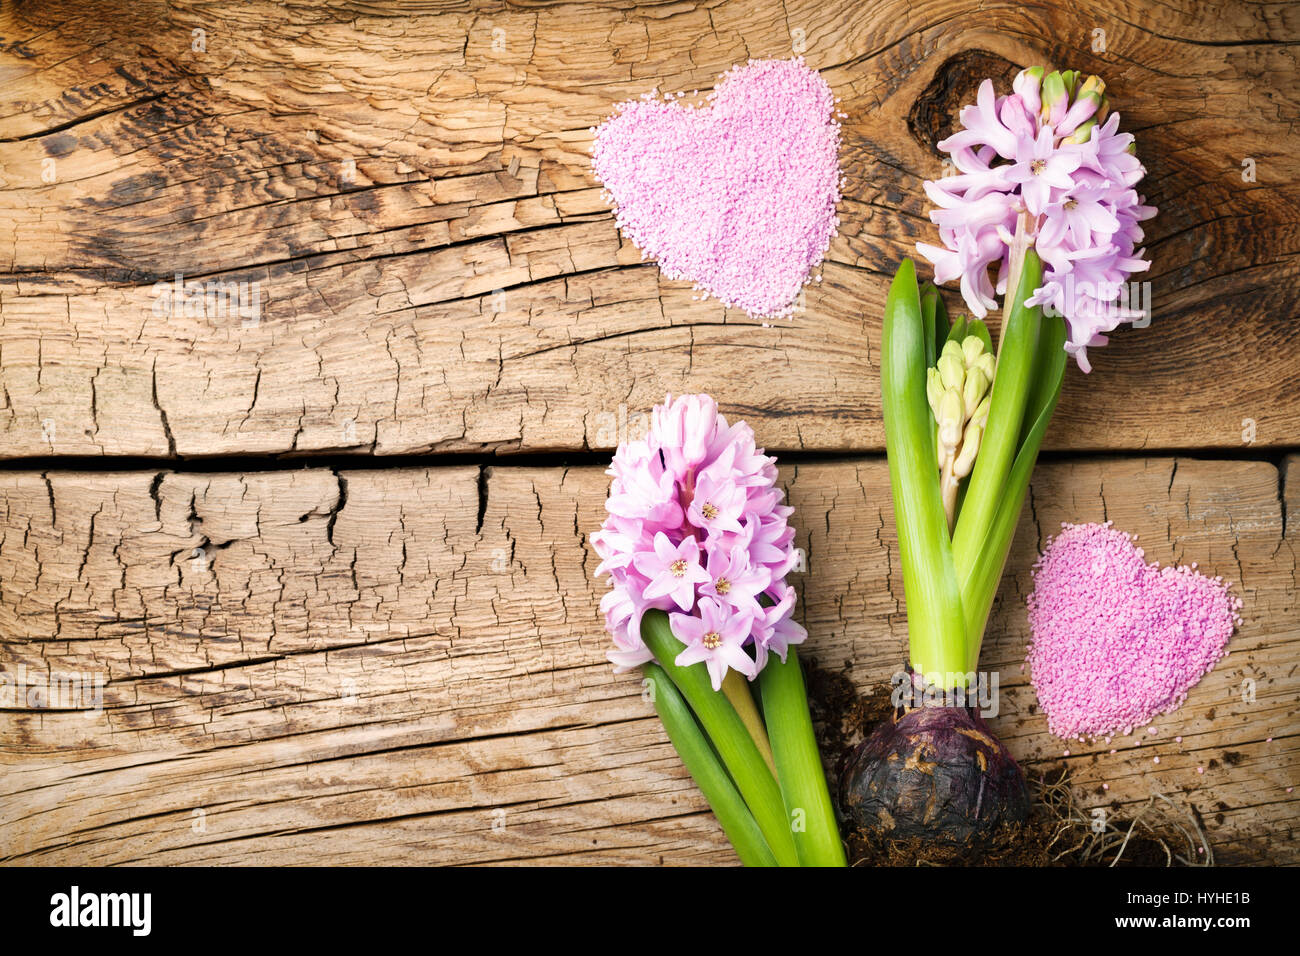 Gardening background with hyacinth flowers on wooden table. Copy space. Top view Stock Photo